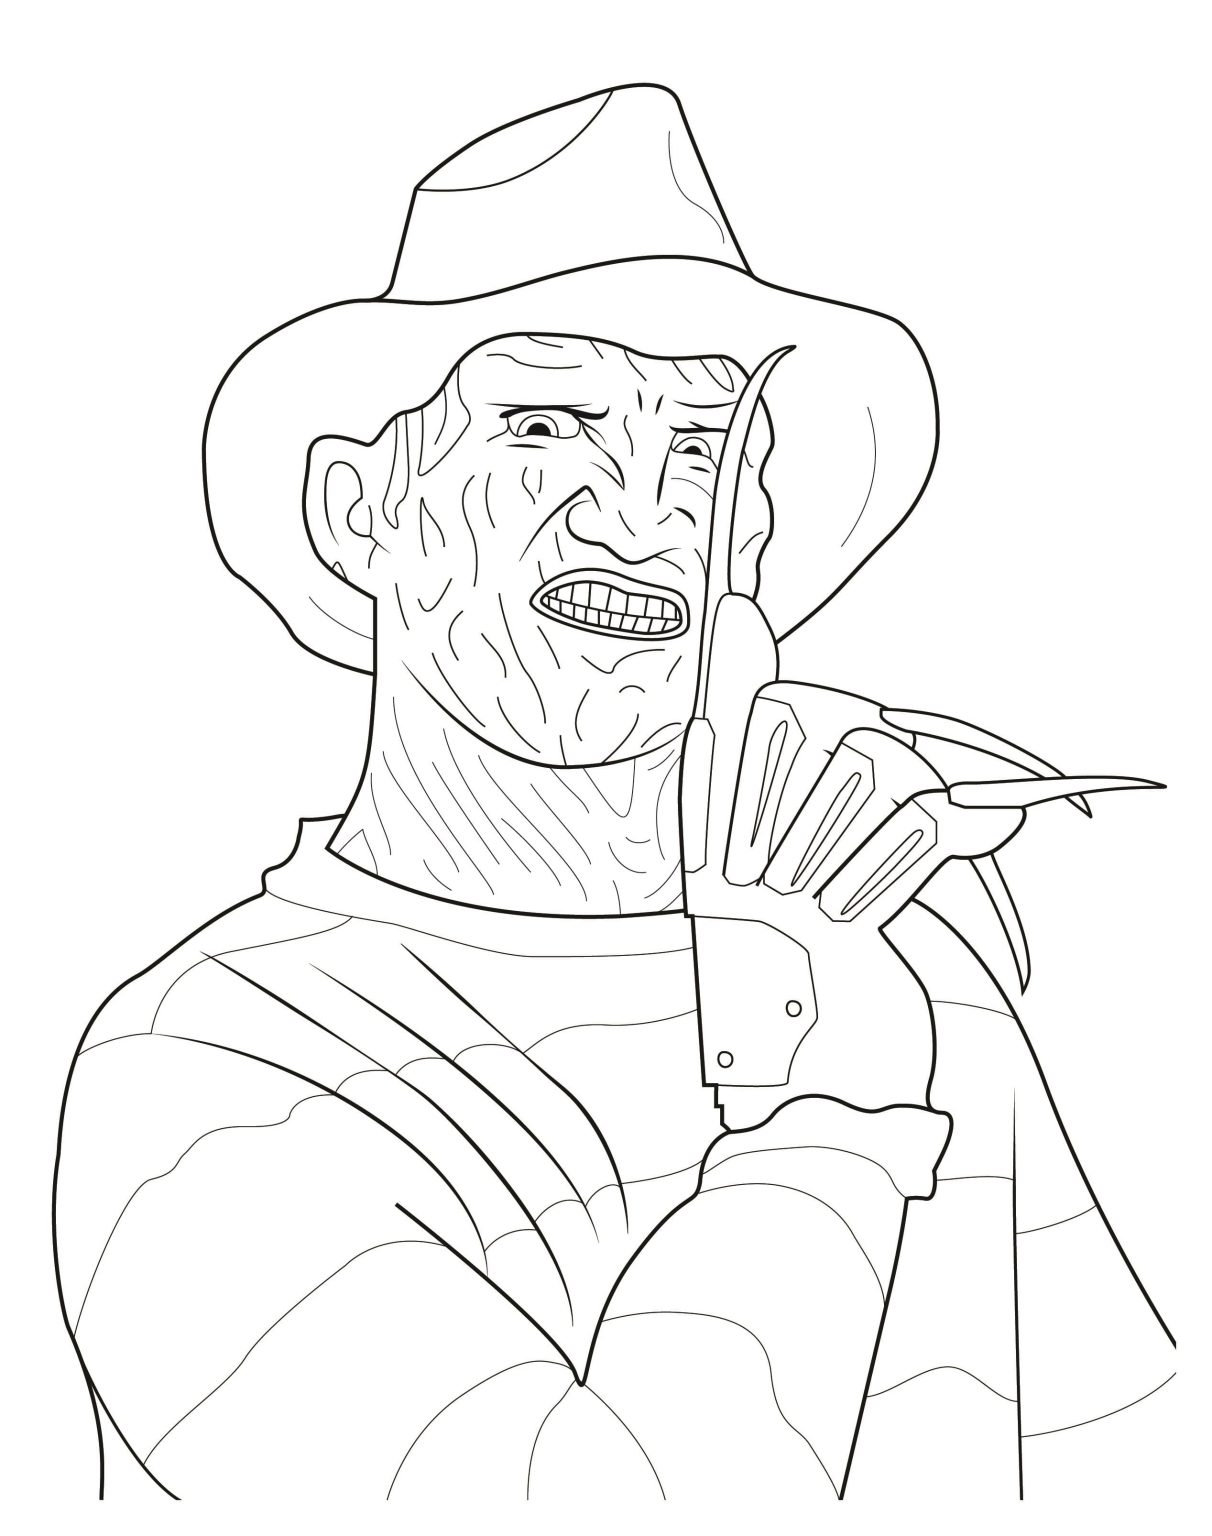 Printable Freddy Krueger Coloring Pages Free For Kids And Adults